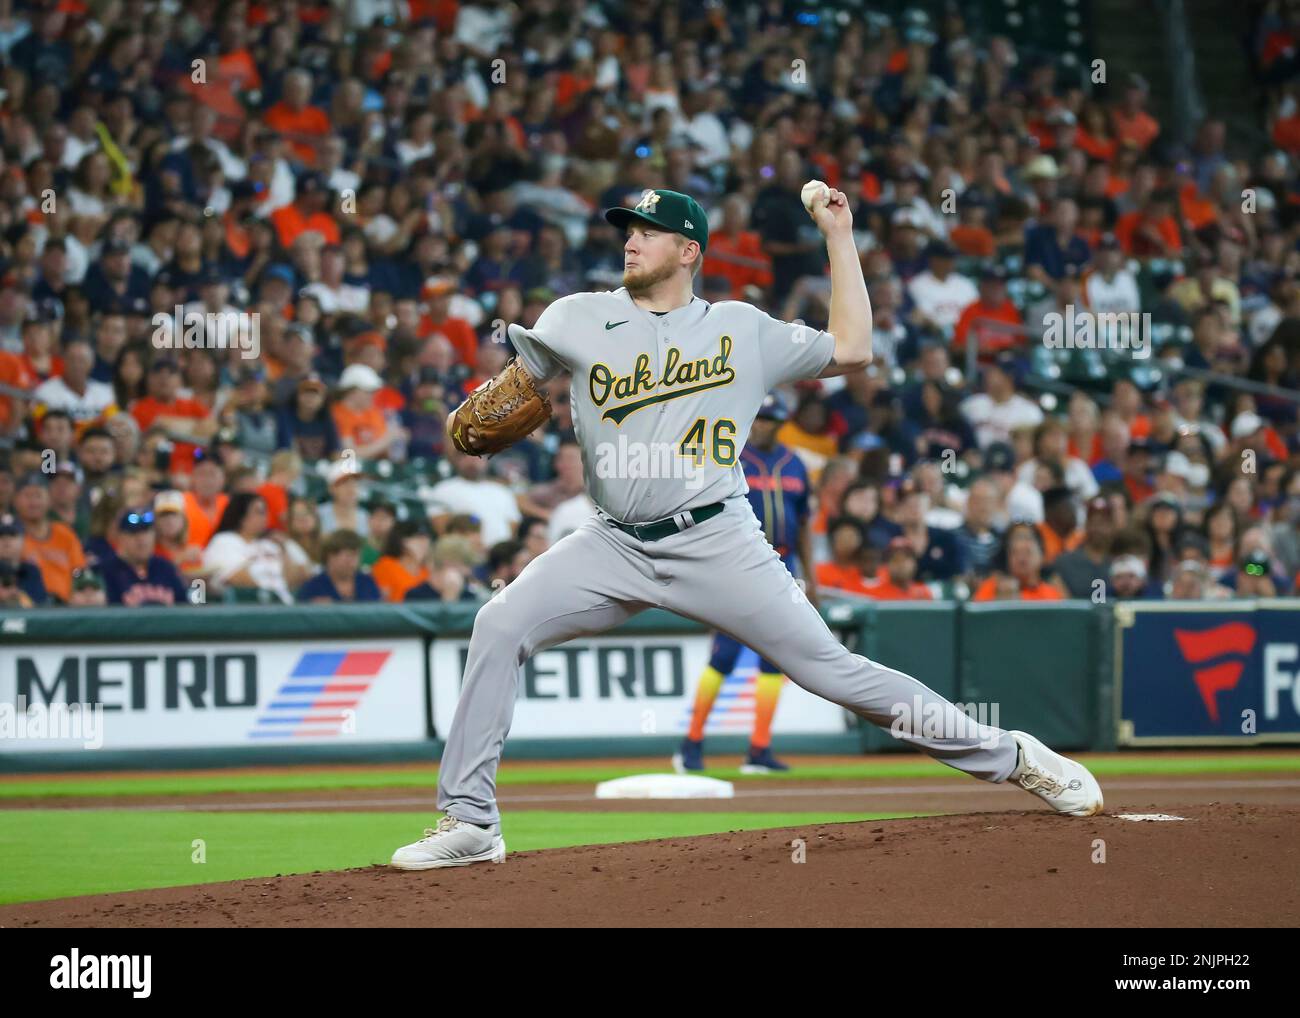 HOUSTON, TX - JULY 16: Oakland Athletics third baseman Vimael Machin (31)  lines out to left in the top of the eighth inning during the MLB game  between the Oakland Athletics and